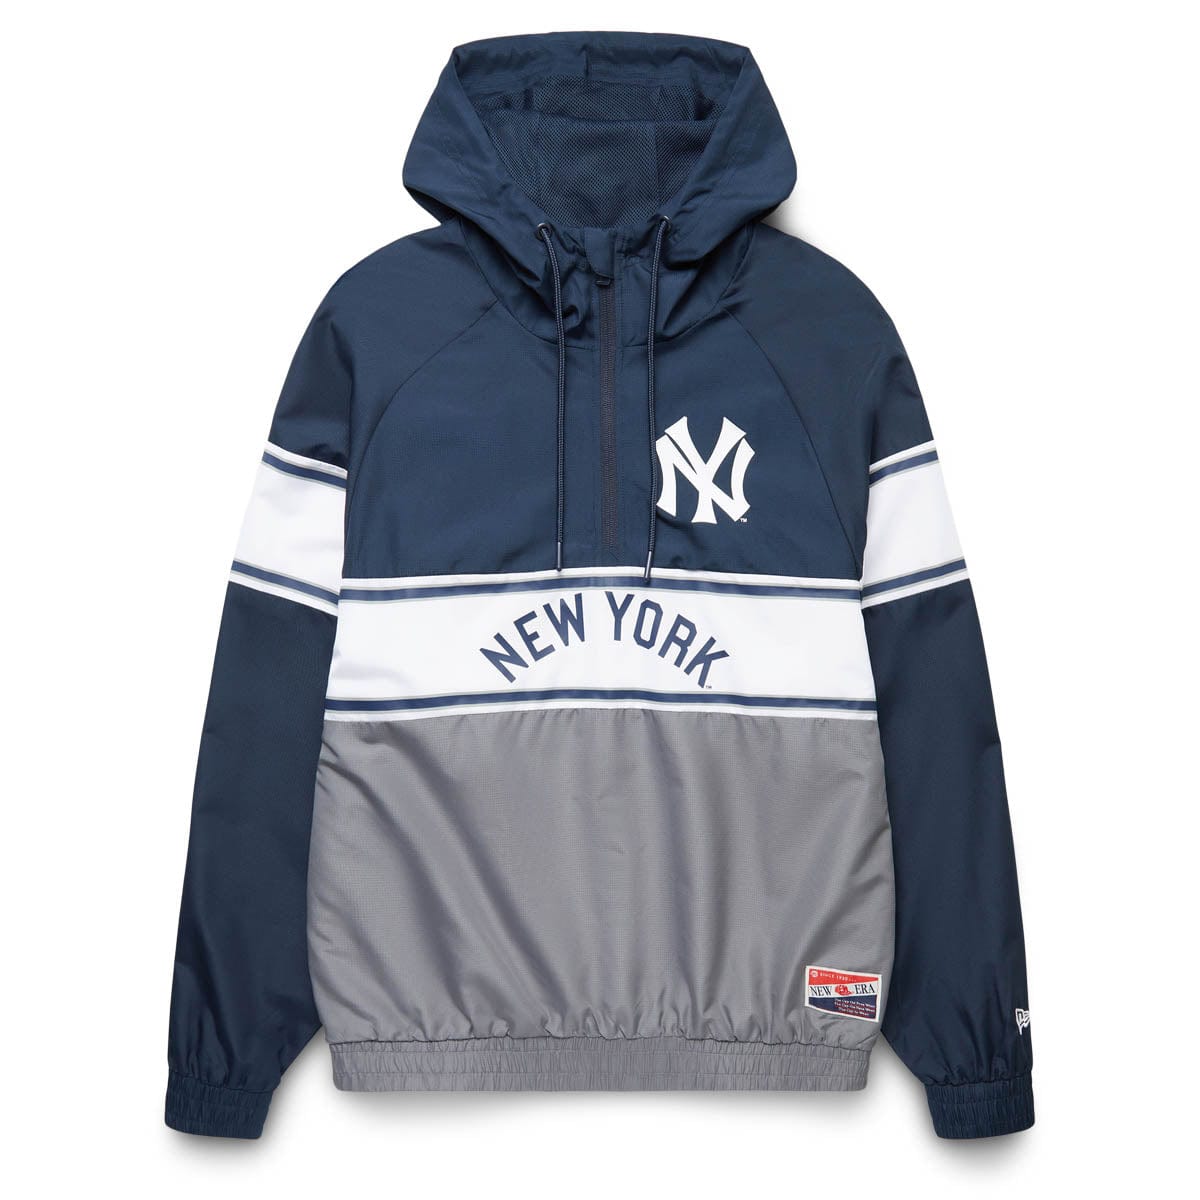 Men's Nike Navy/White New York Yankees Cooperstown Collection V-Neck Pullover Windbreaker, XL